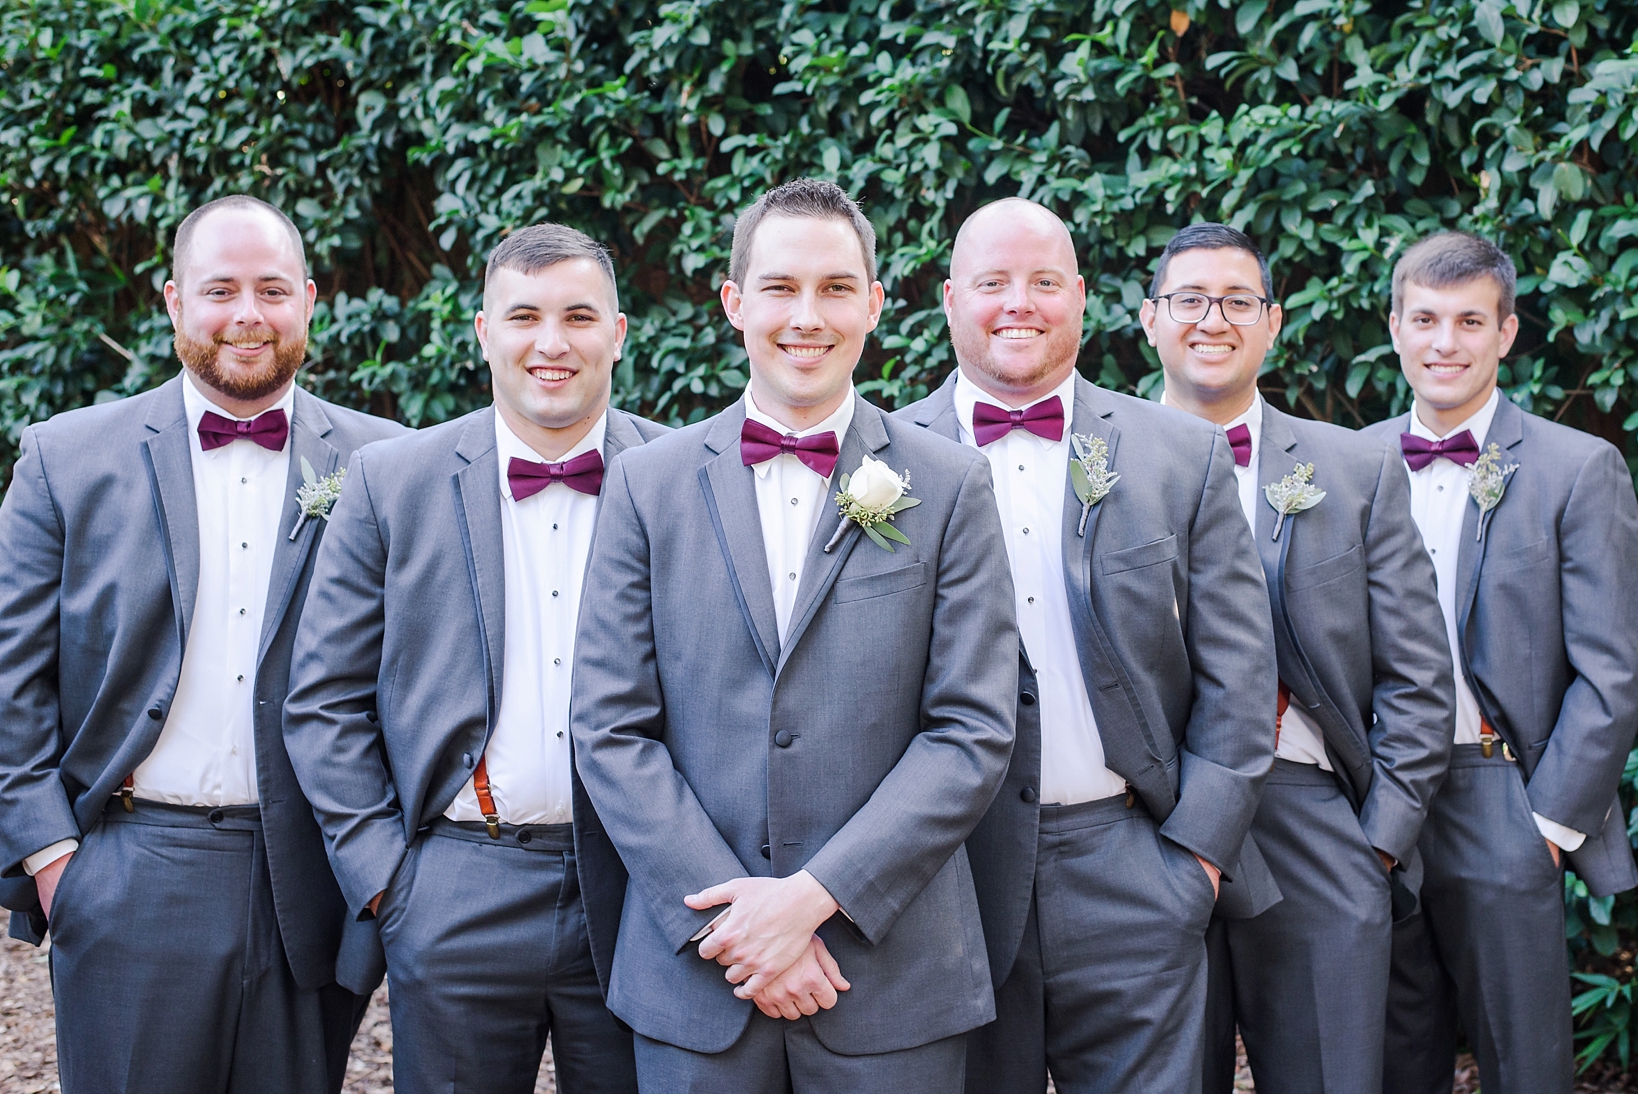 Classic portrait of the Groom and his Groomsmen